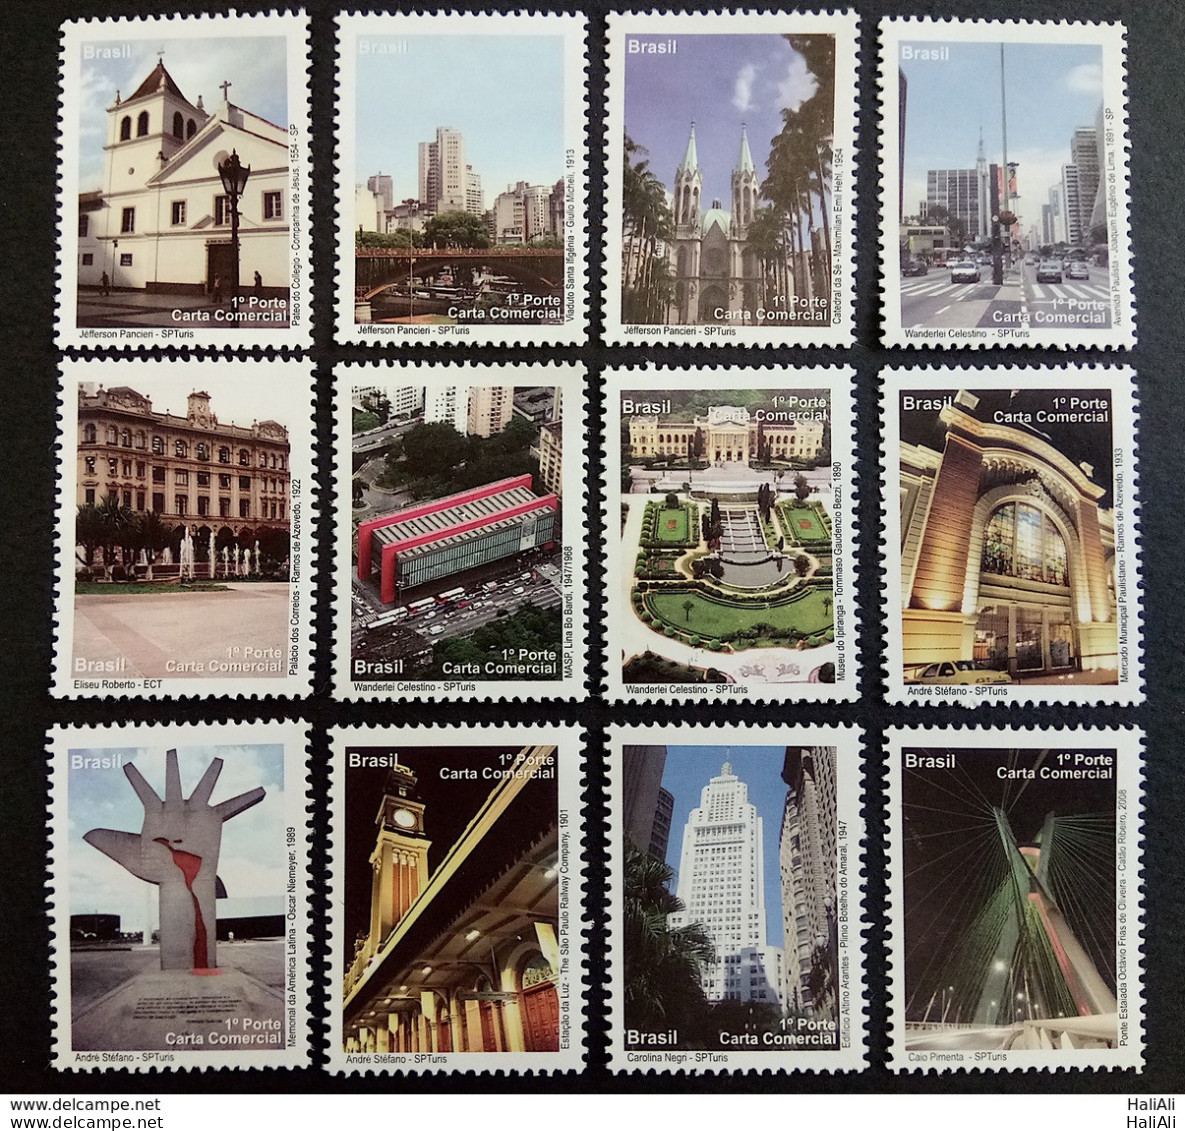 C 2885 Brazil Depersonalized Stamp Tourism Sao Paulo Church Bridge 2009 Vertical Complete Series - Sellos Personalizados